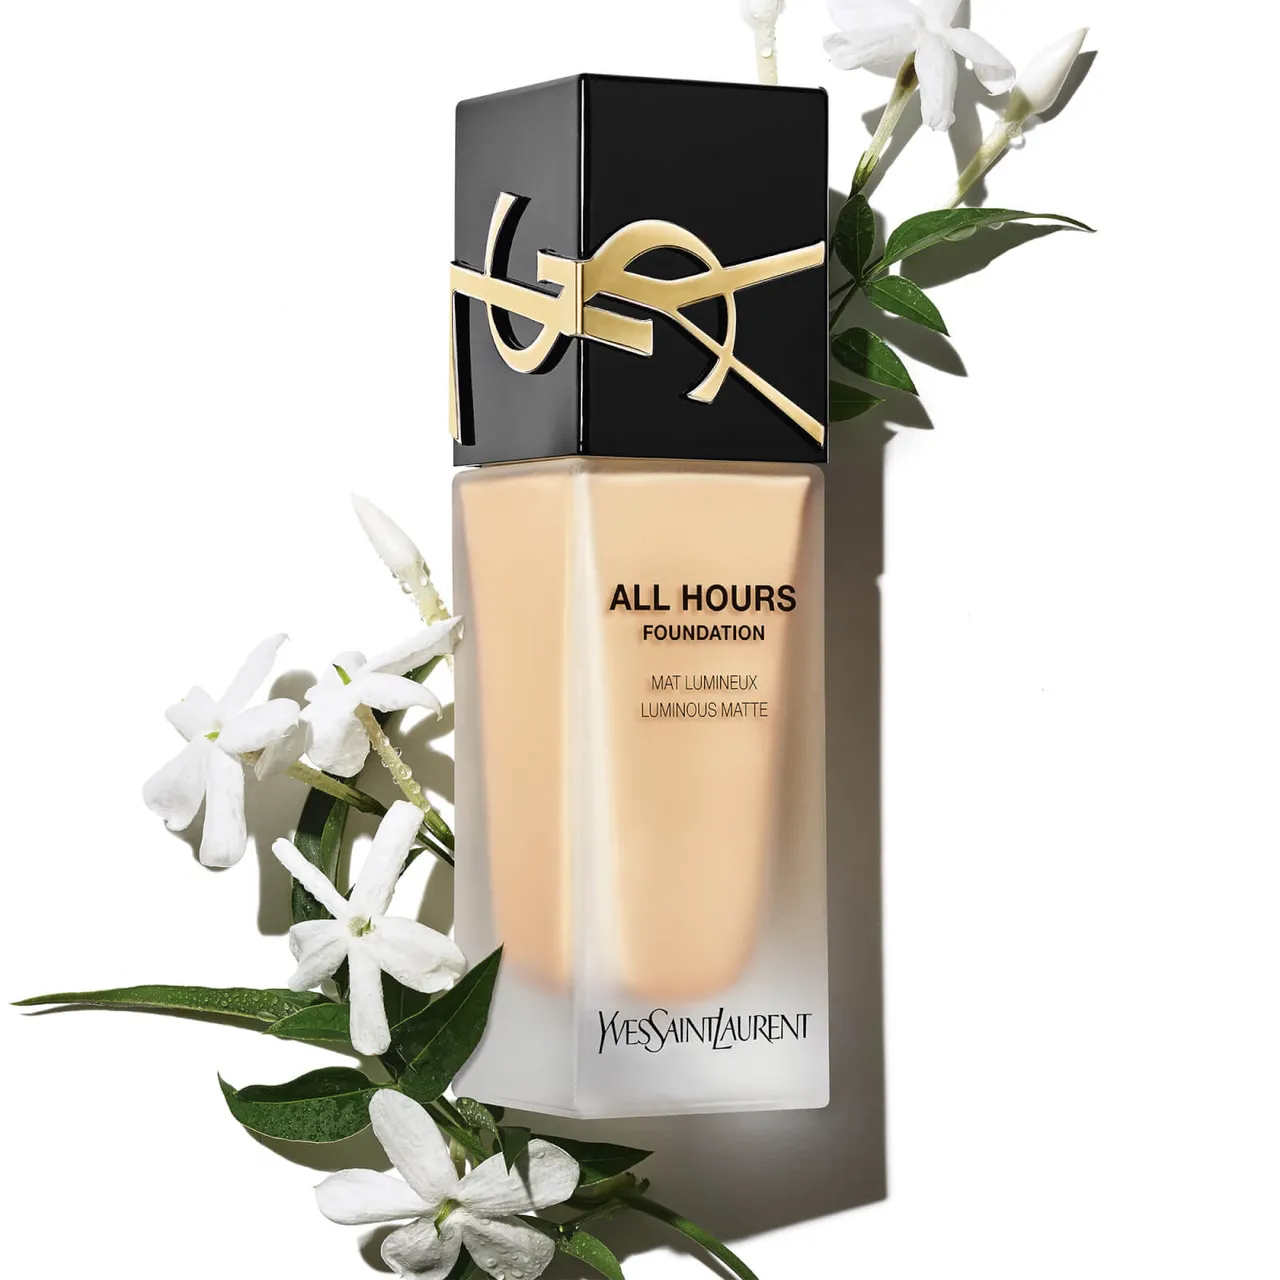 Yves Saint Laurent All Hours Luminous Matte Foundation with SPF 39 25ml (Various Shades) - LN9